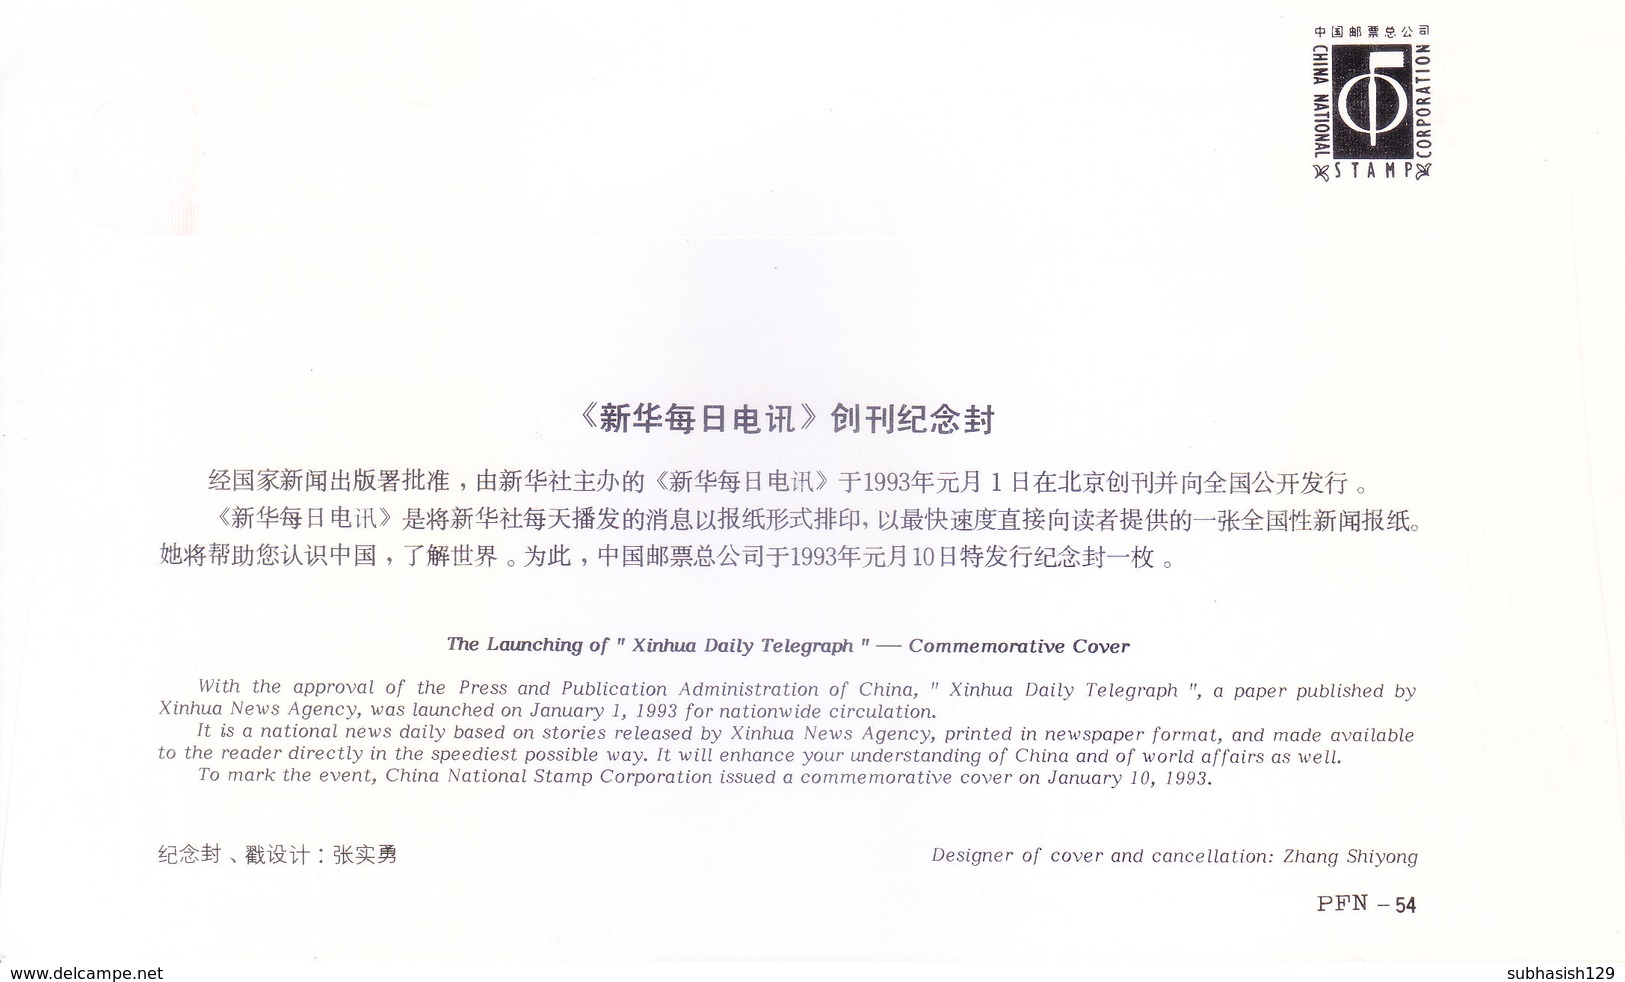 CHINA 10-01-1993 OFFICIAL COMMEMORATIVE COVER - THE LAUNCHING OF 'XINHUA DAILY TELEGRAPH' - Covers & Documents